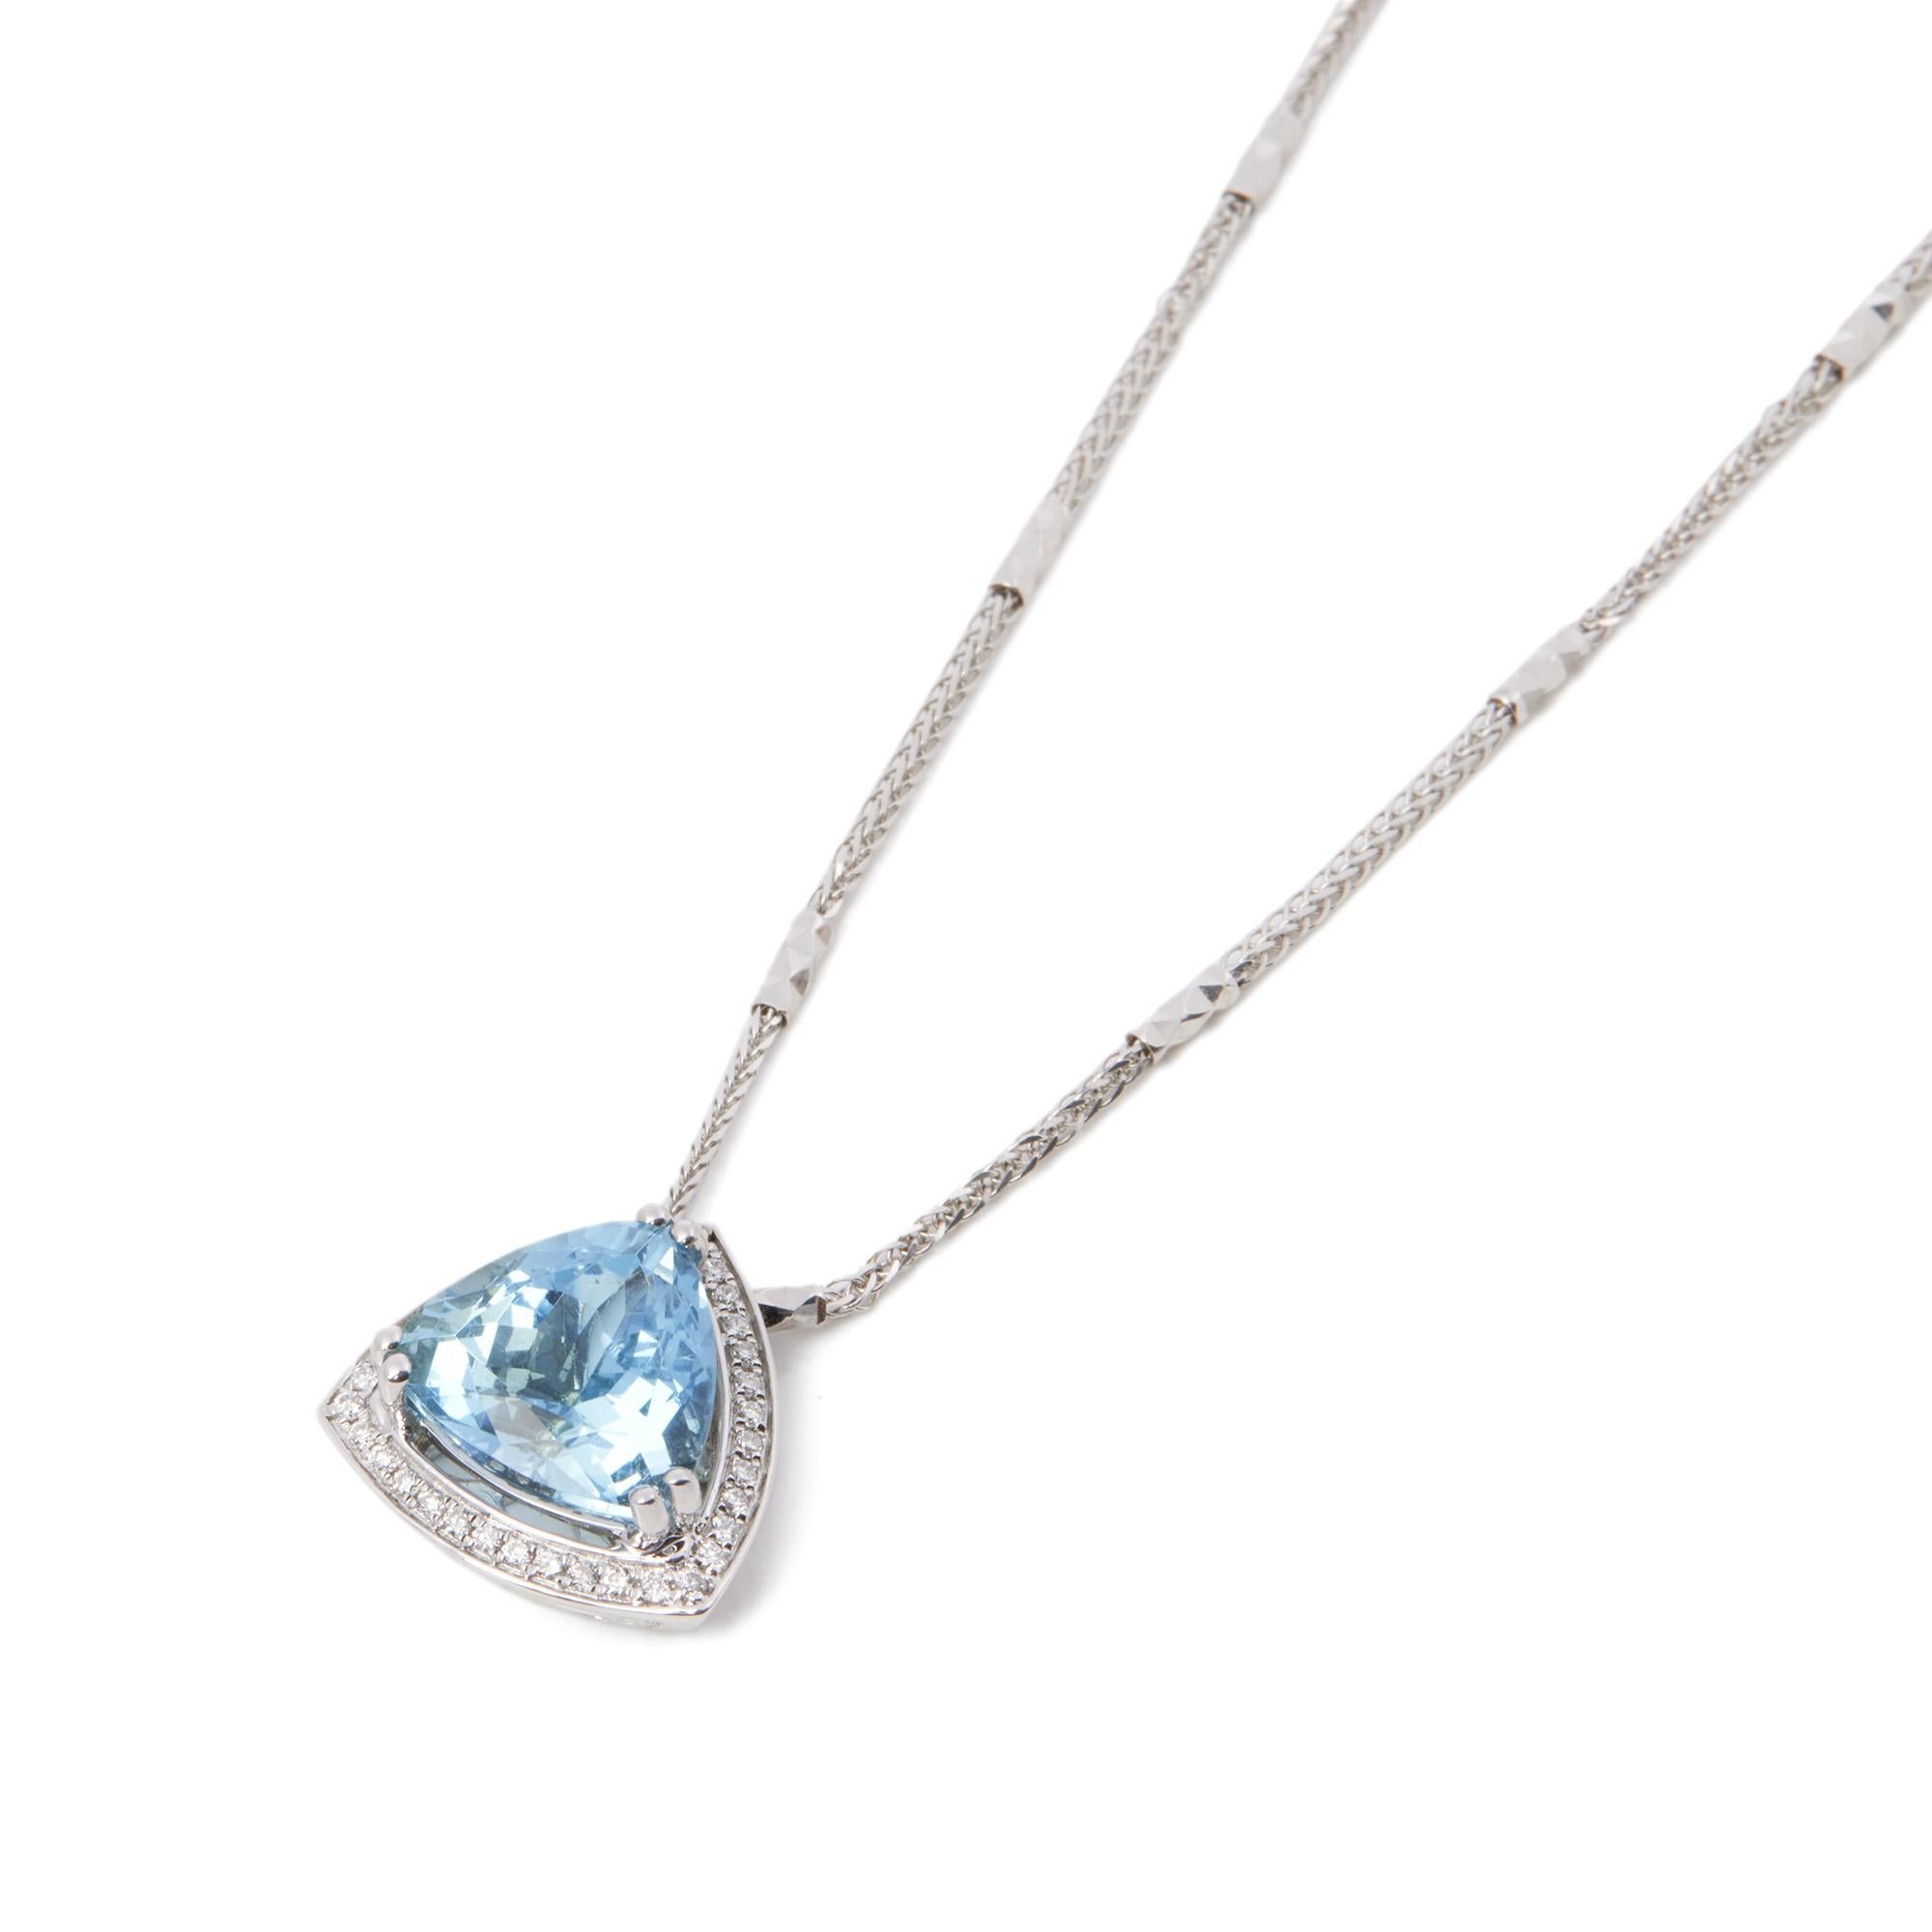 This pendant is from the private collection of gemstone jewellery individually designed by David Jerome. It features a trillion cut aquamarine set with diamonds. Accompanied by an IGR gem certificate. 